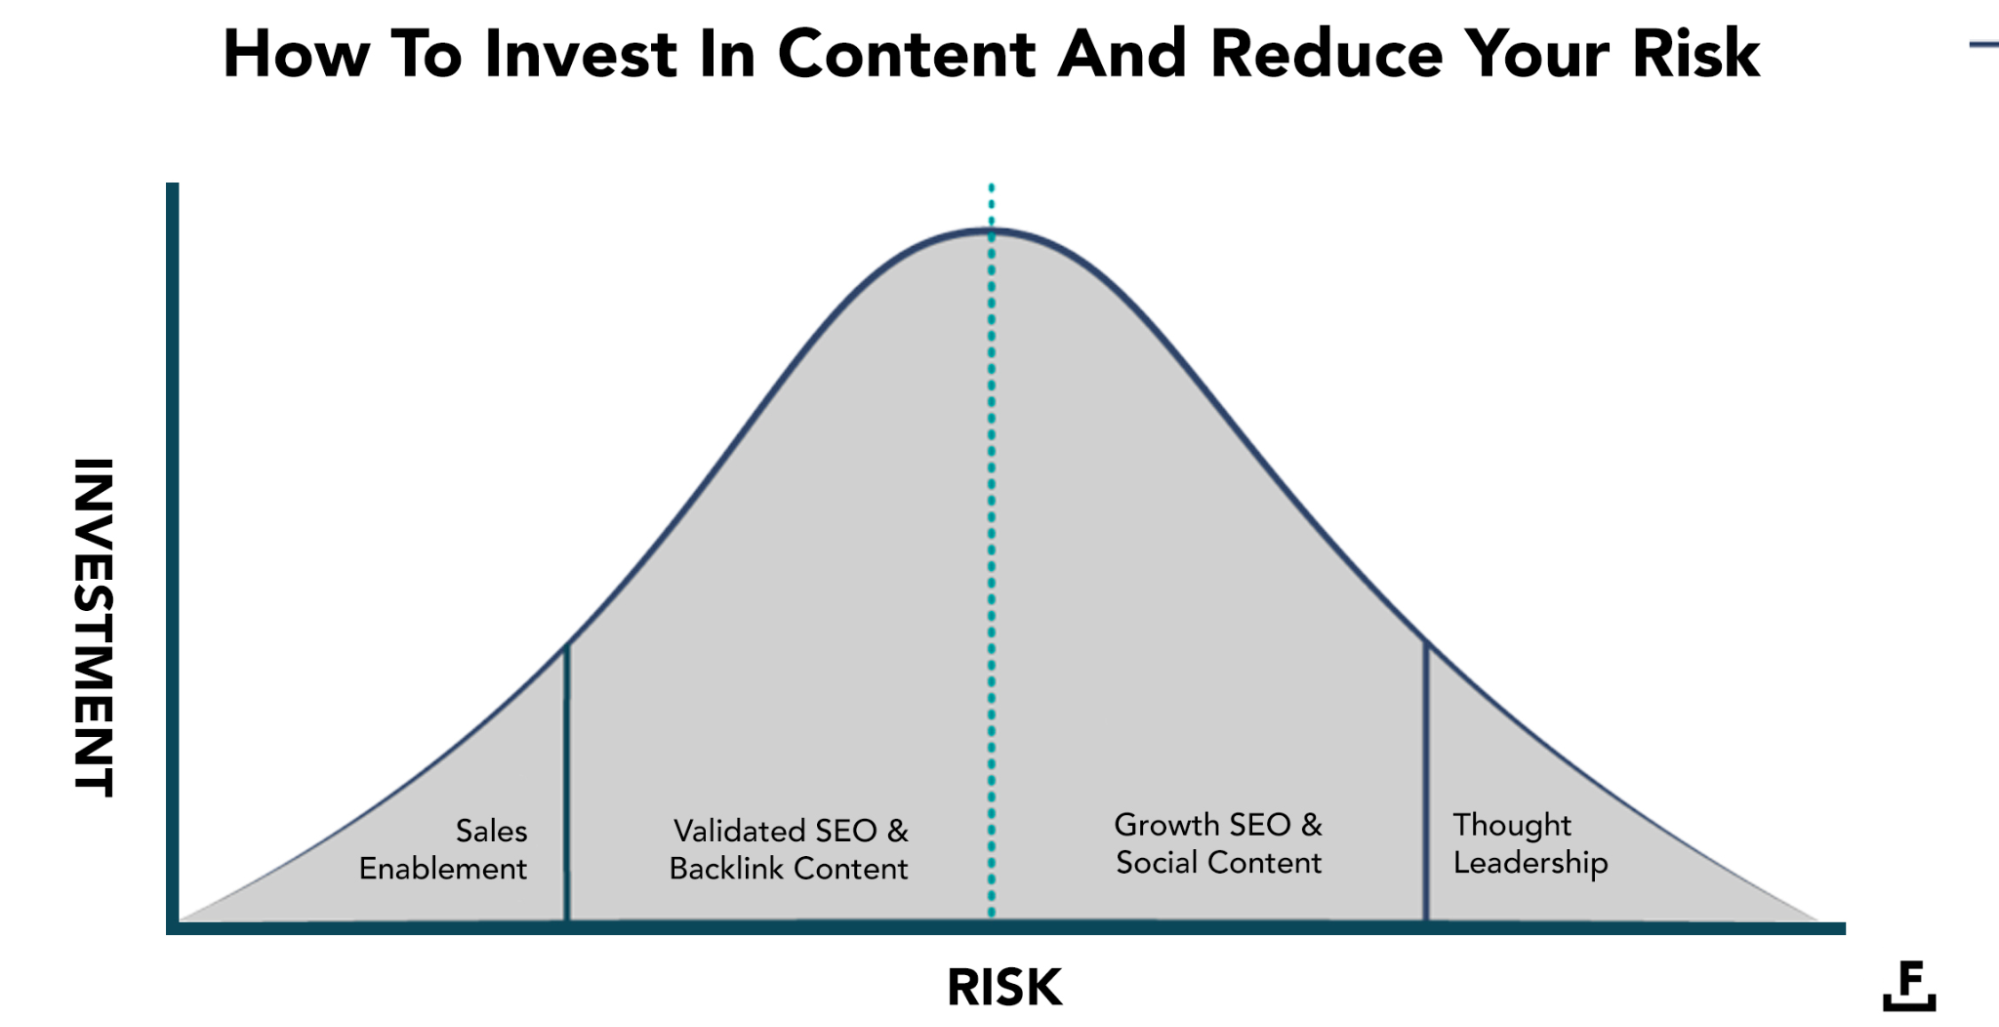 Validated and growth SEO risk and investment levels